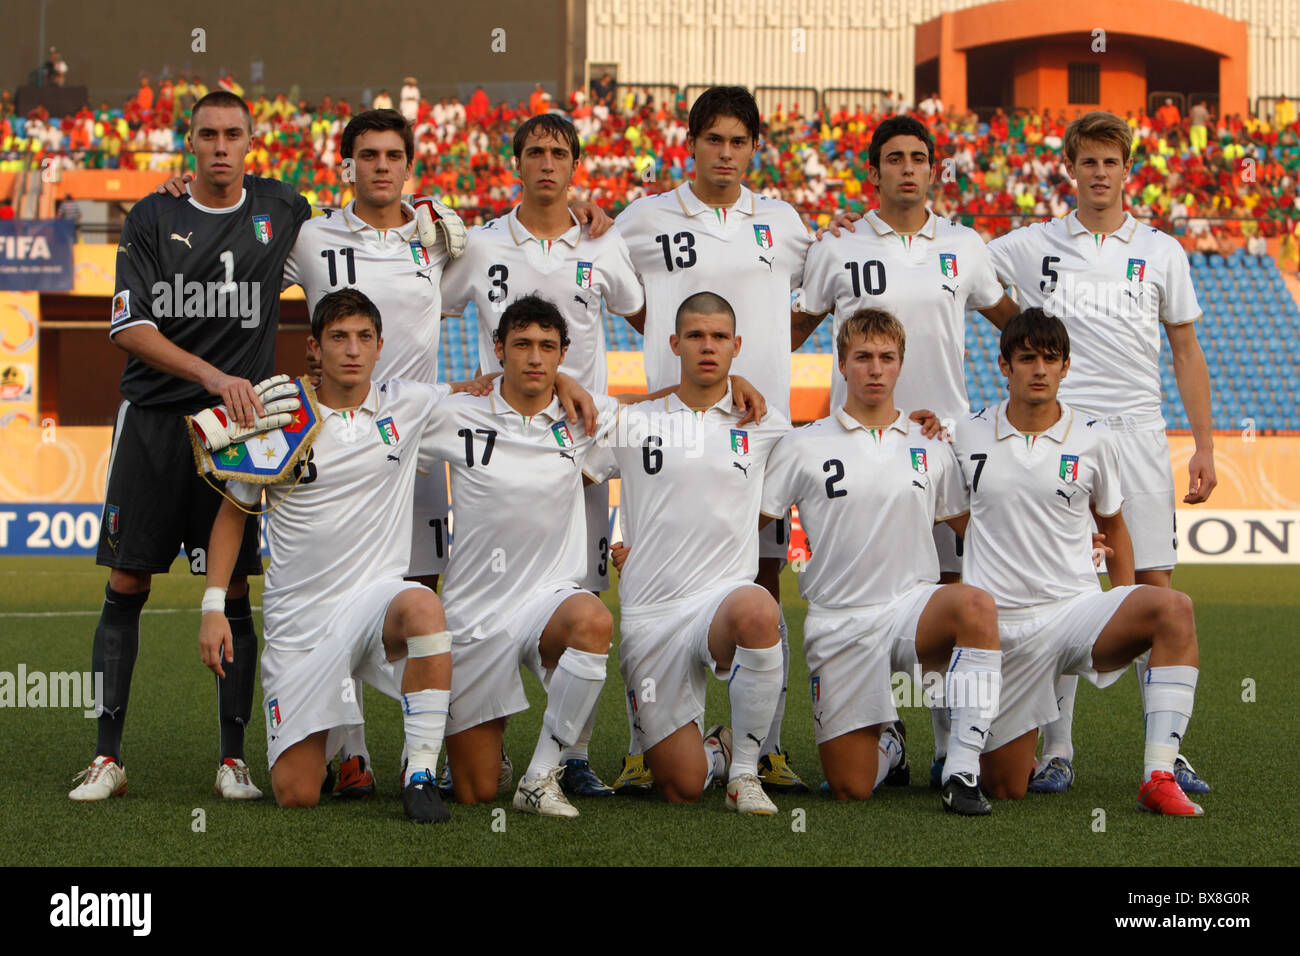 The Italy U-20 National Team lines up prior to the start of a FIFA U-20 World Cup round of 16 match against Spain. Stock Photo